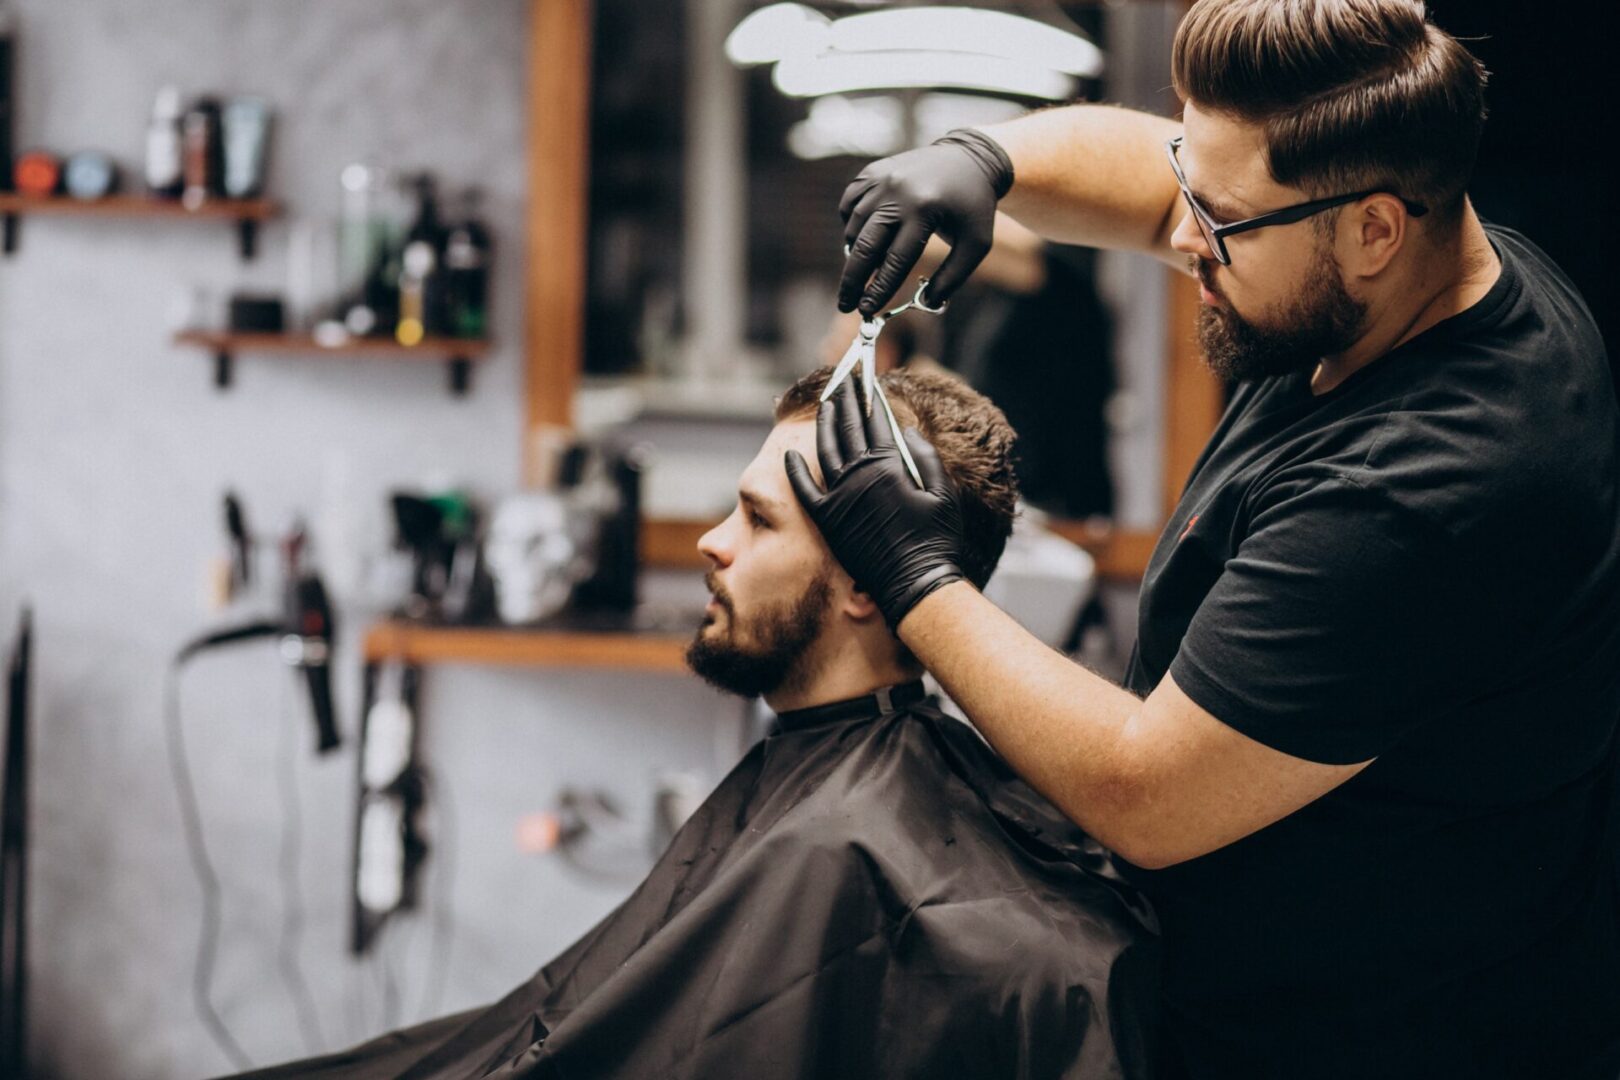 A man getting his hair cut by another person